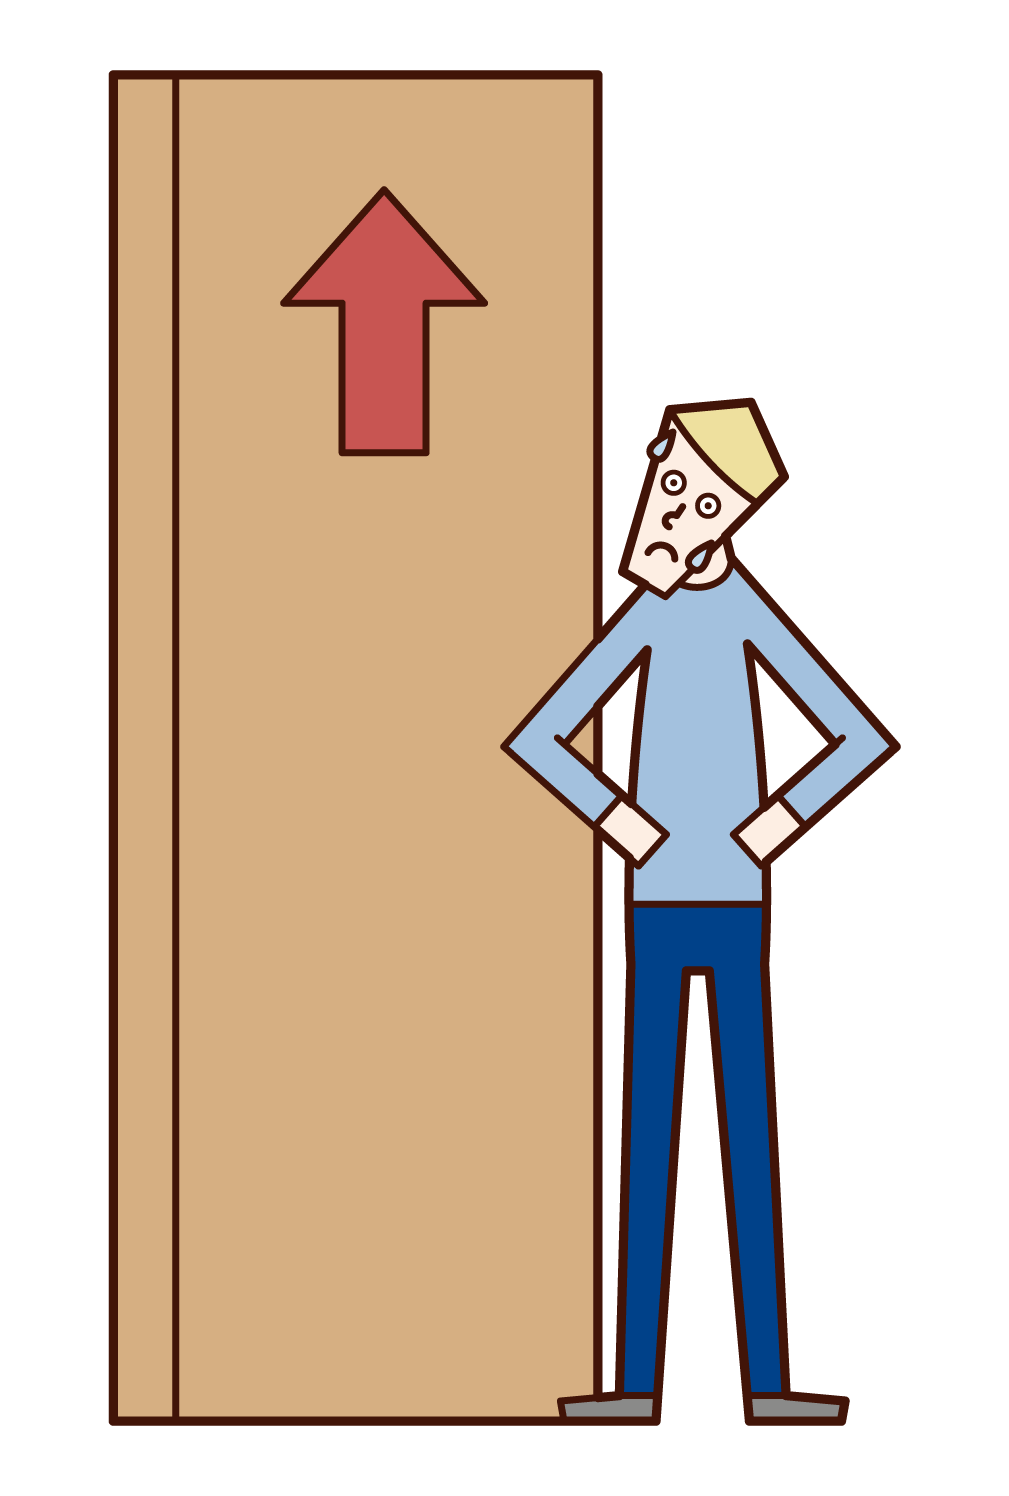 Illustration of a man facing barriers and trials